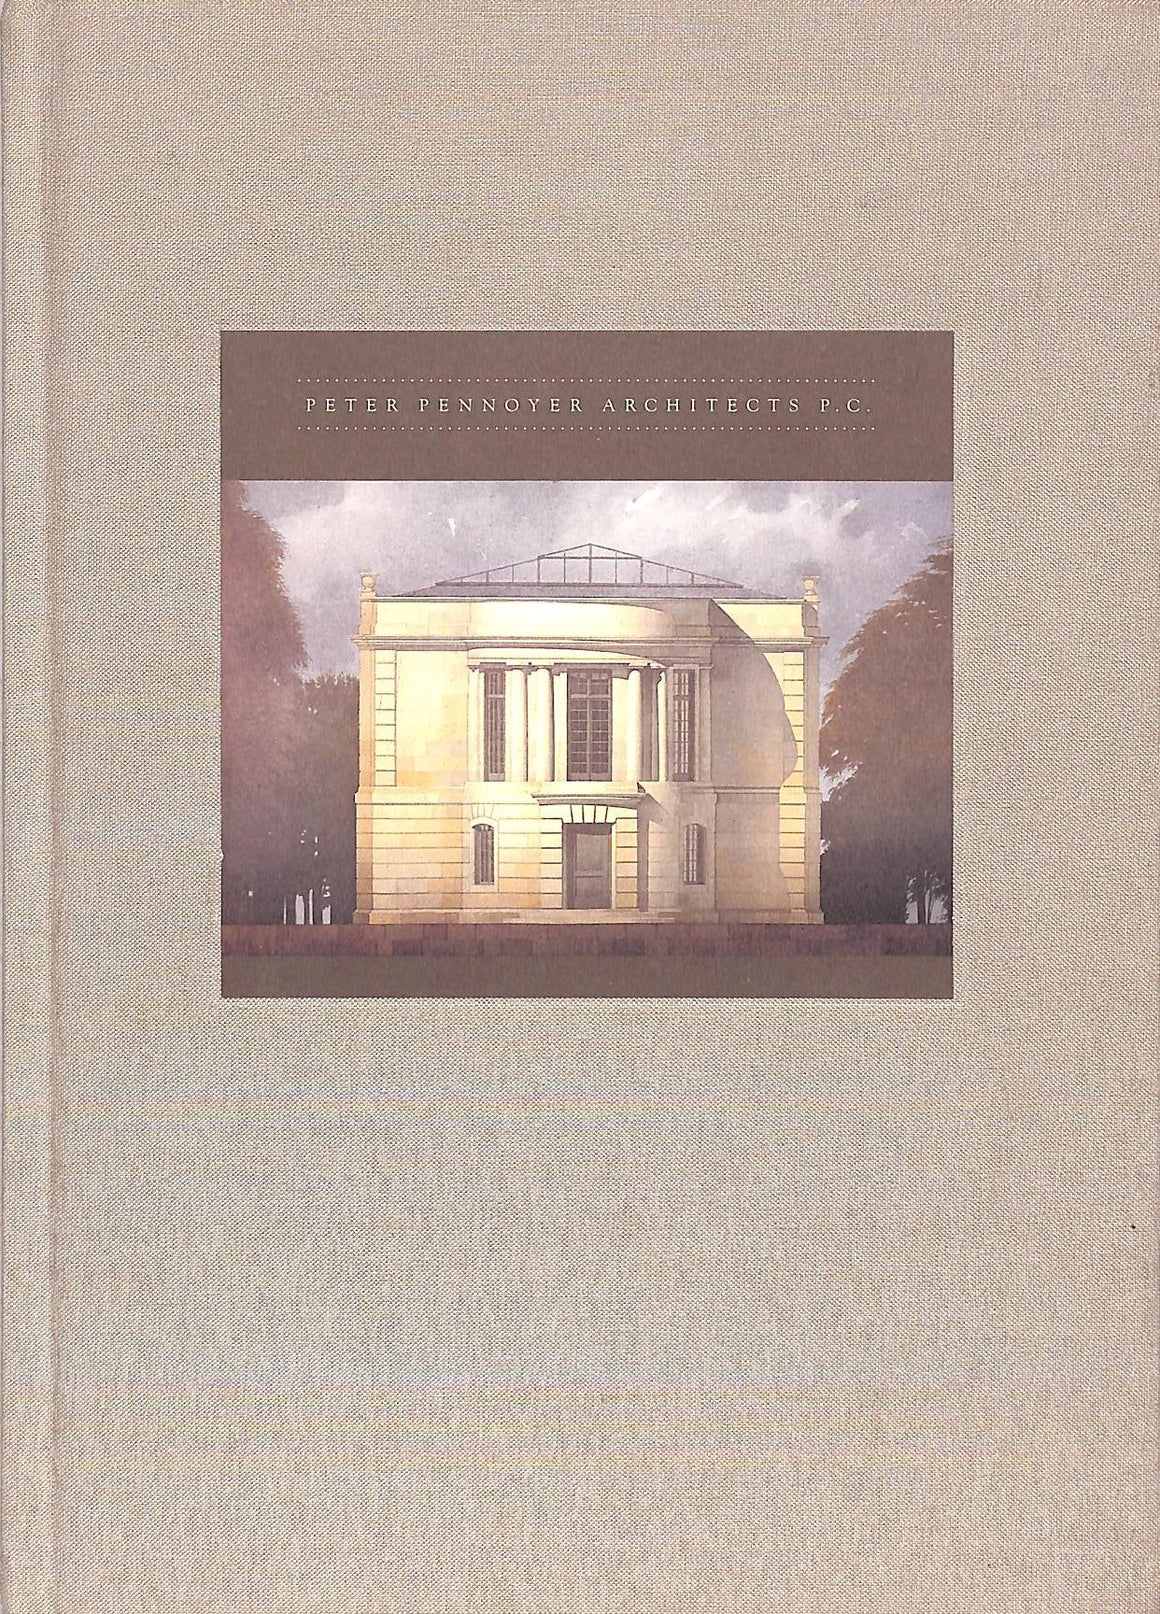 "Peter Pennoyer Architects P.C." (SOLD)